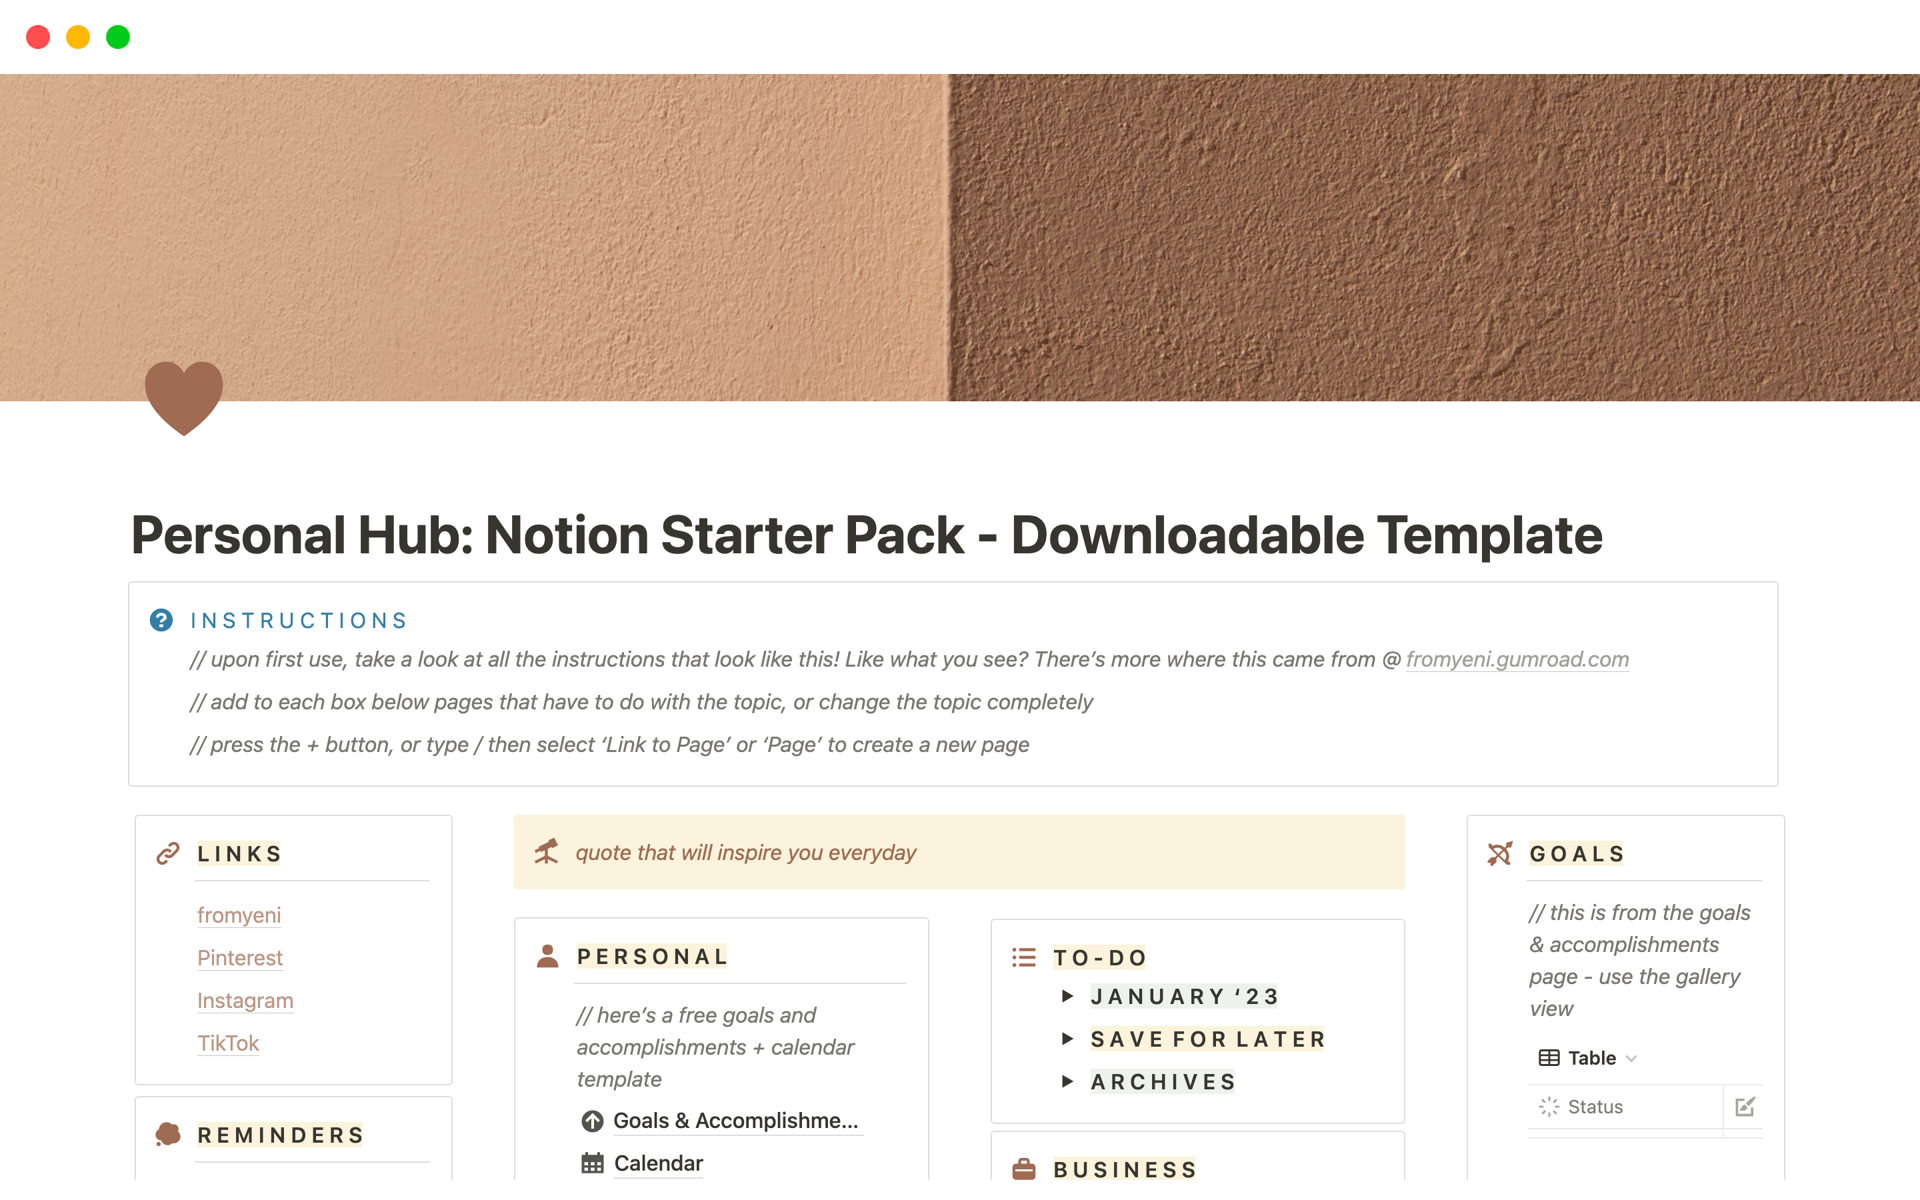 Kickstart your Notion journey with a starter pack full of 6 templates!